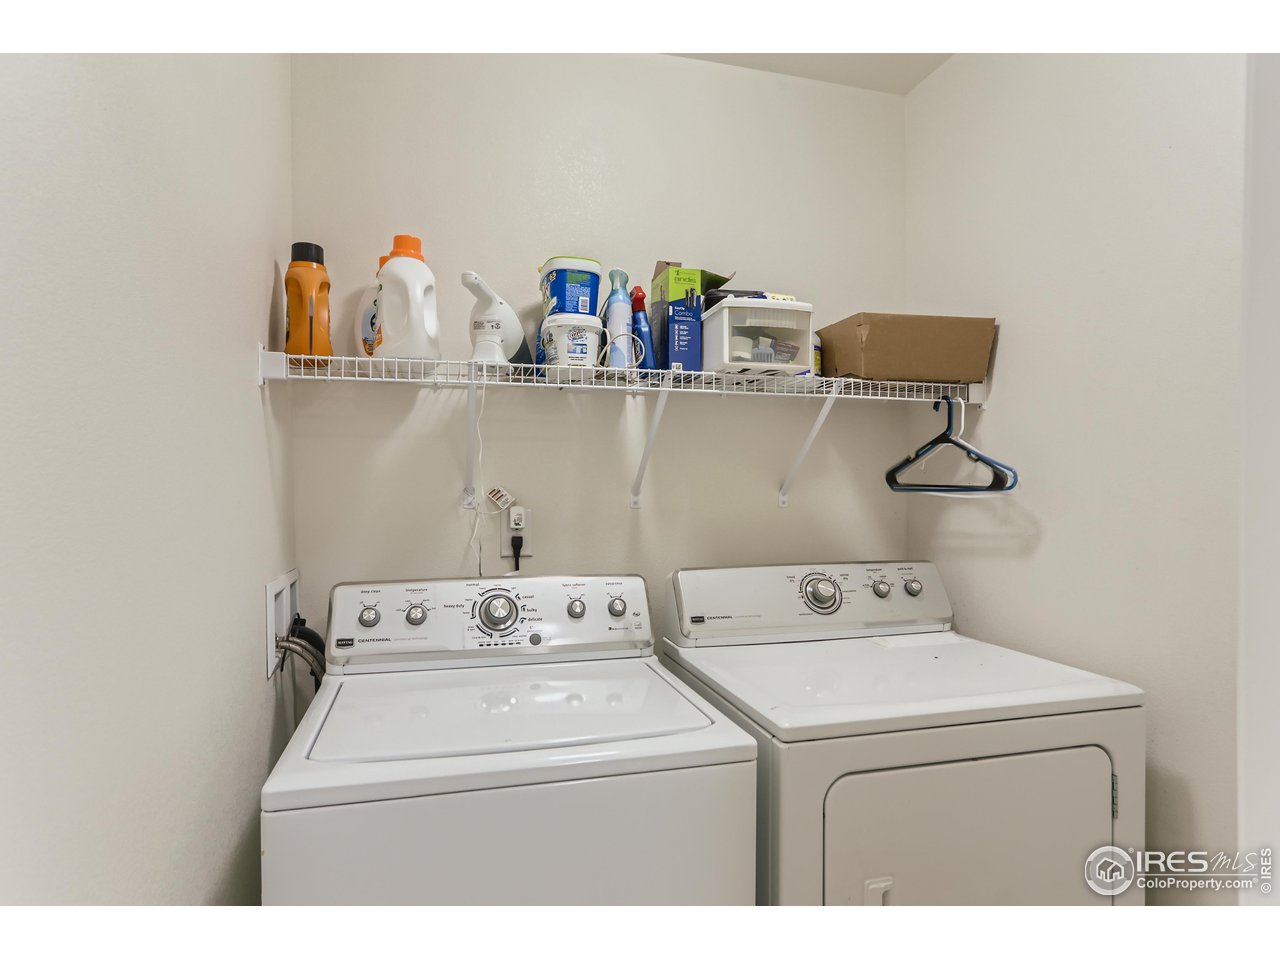 Upstairs Laundry - washer/dryer excluded.